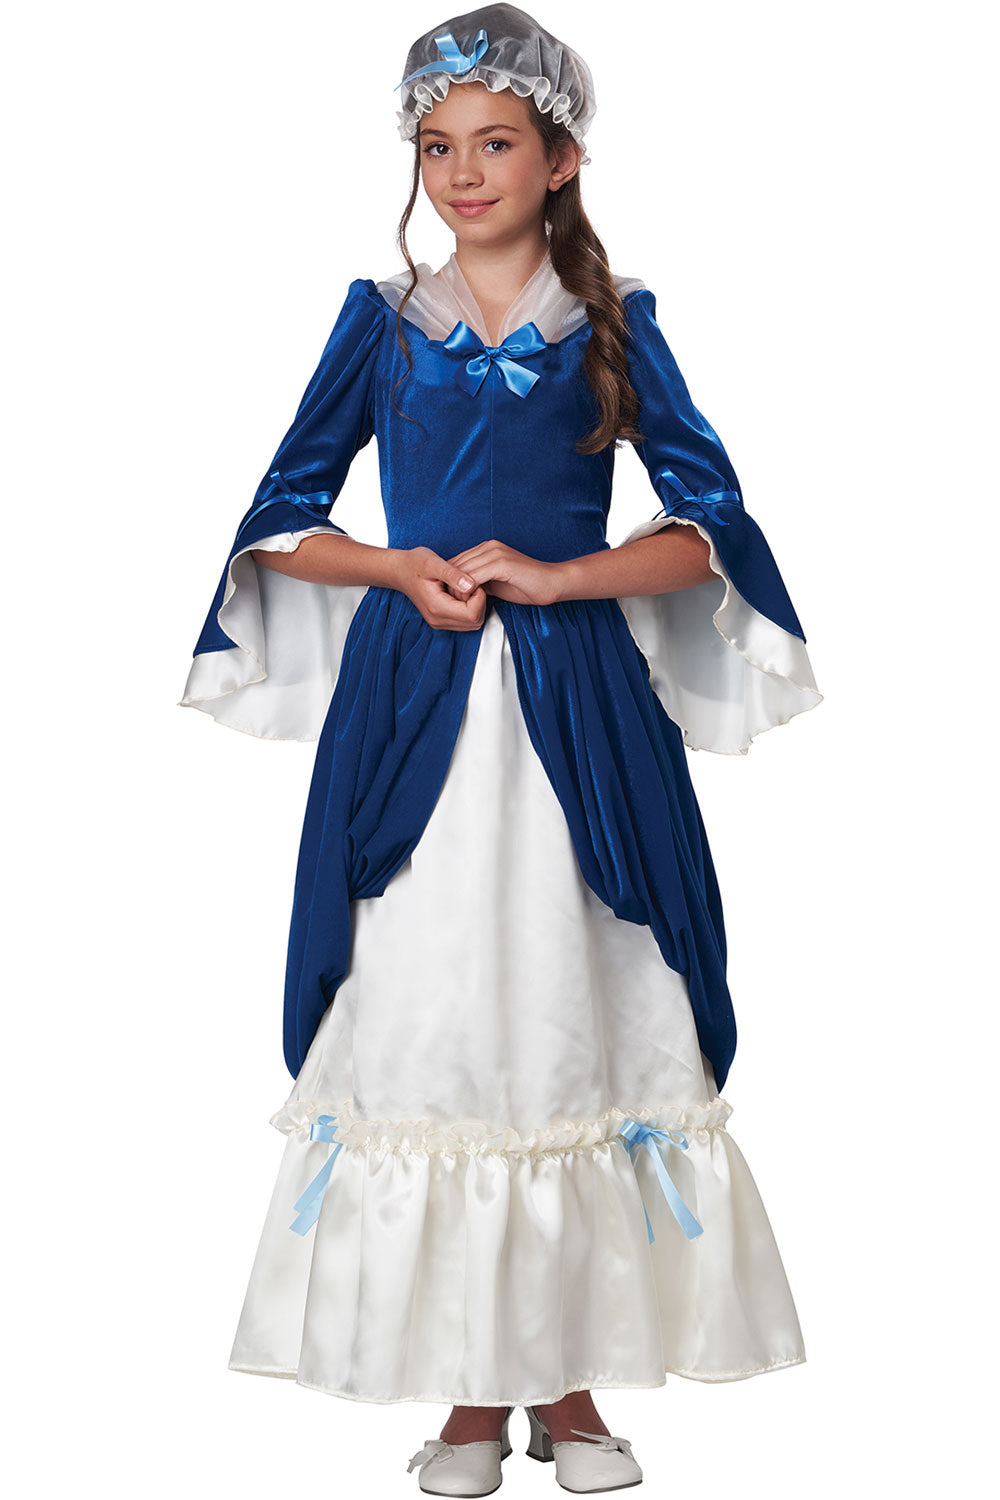 California Costume American Colonial Dress Prairie Child Girls Outfit  3021-125